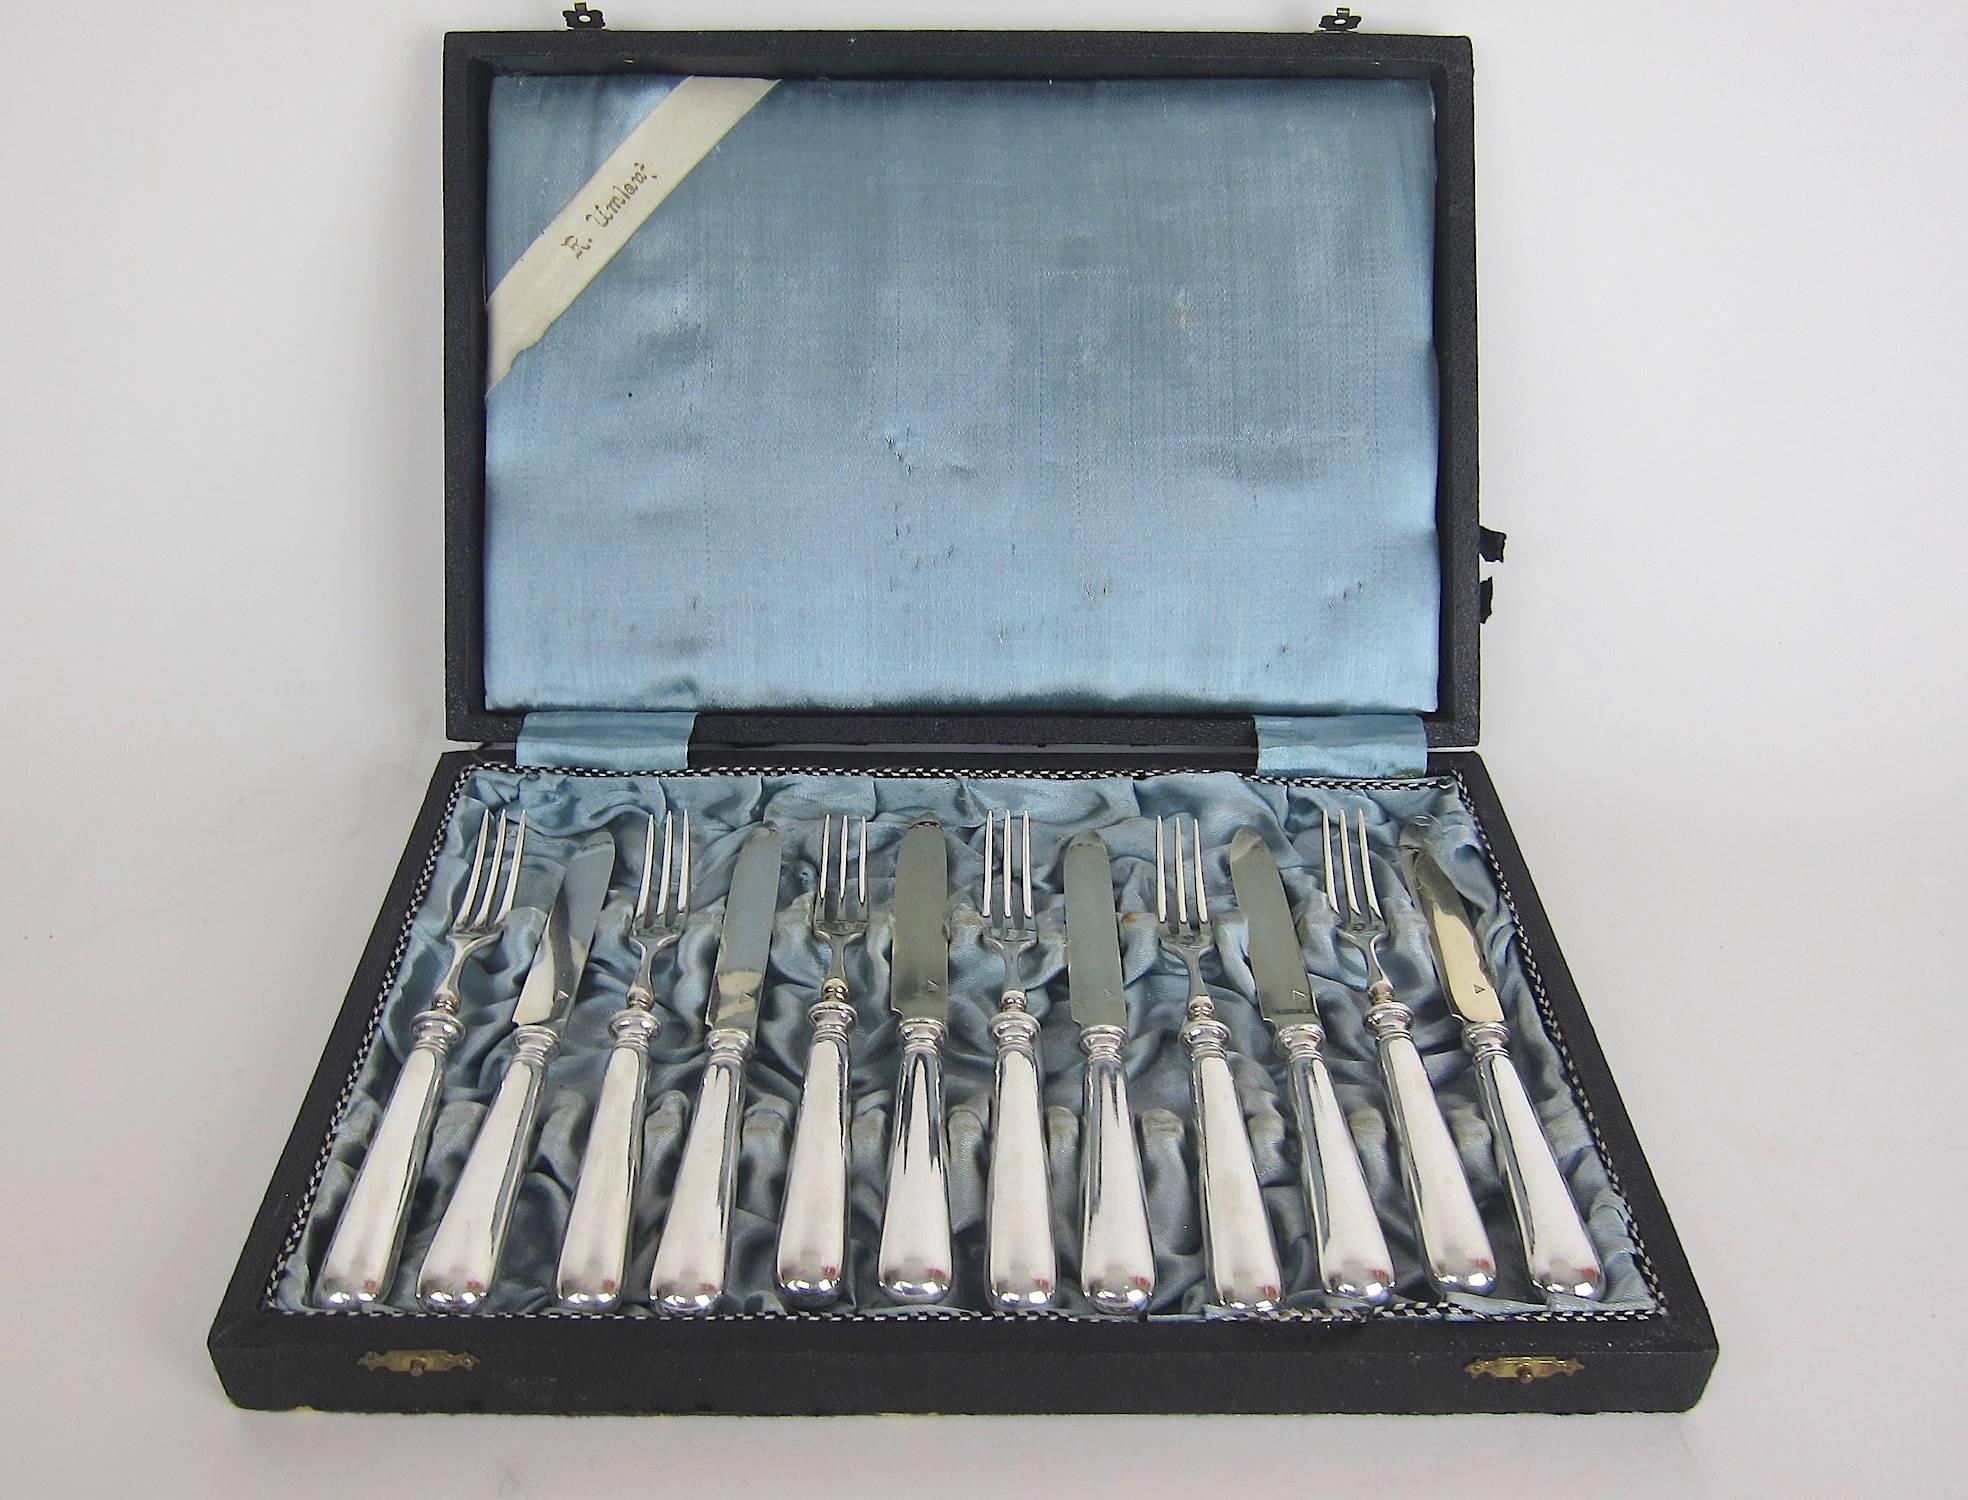 A vintage European silver-plated service for dessert, entremet, or fruit, comprised of six knives and forks by Sandrik, formerly of Austria-Hungary and Czechoslovakia. Designed in a simple and traditional style, the set dates to the 1930s and